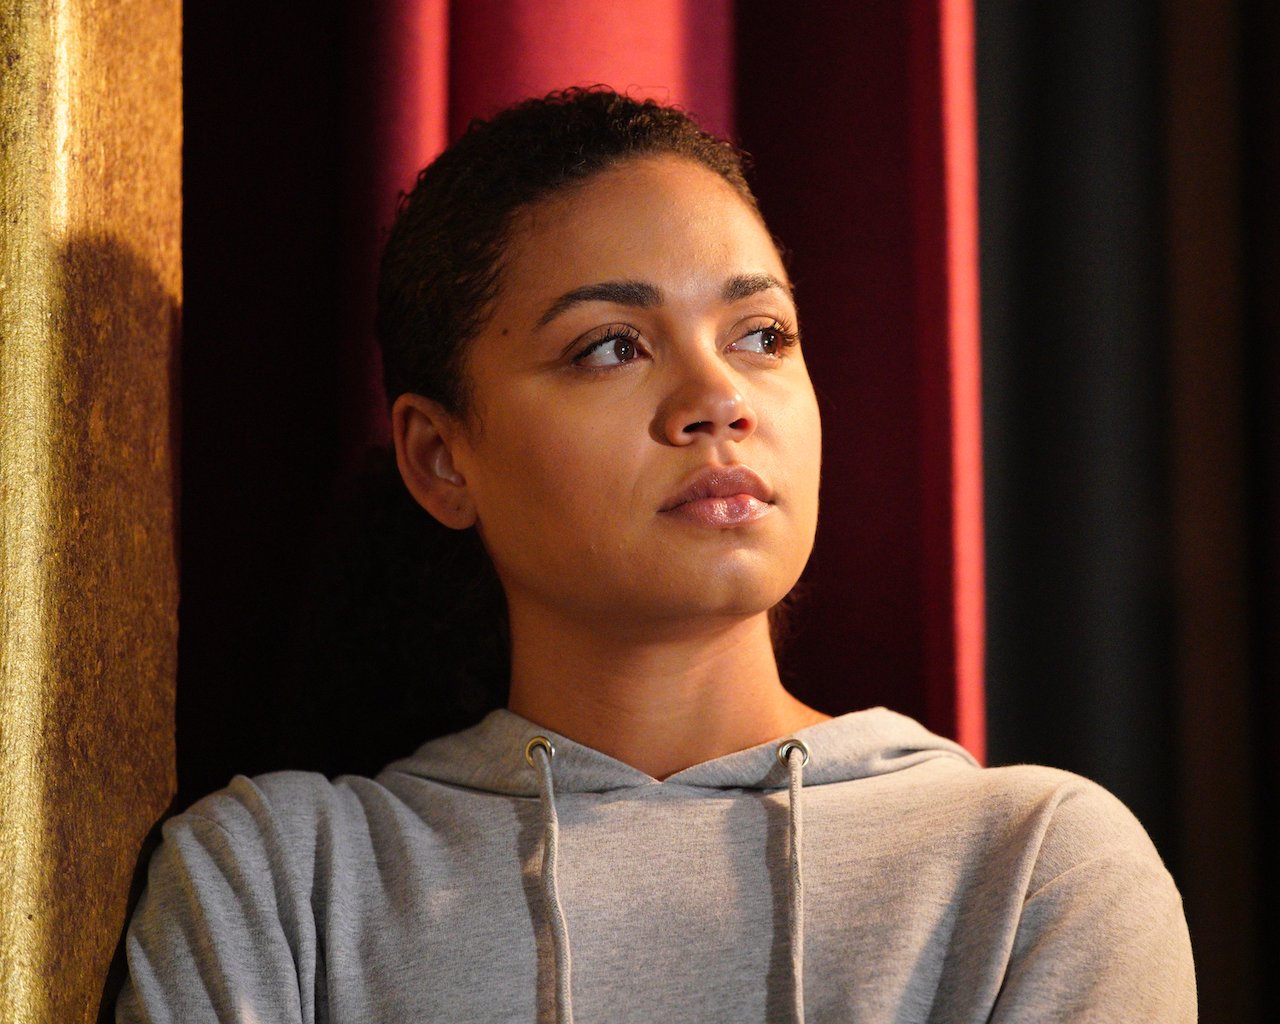 BARRETT DOSS as Victoria Hughes on 'Station 19' looks to the side wearing a sweatshirt.